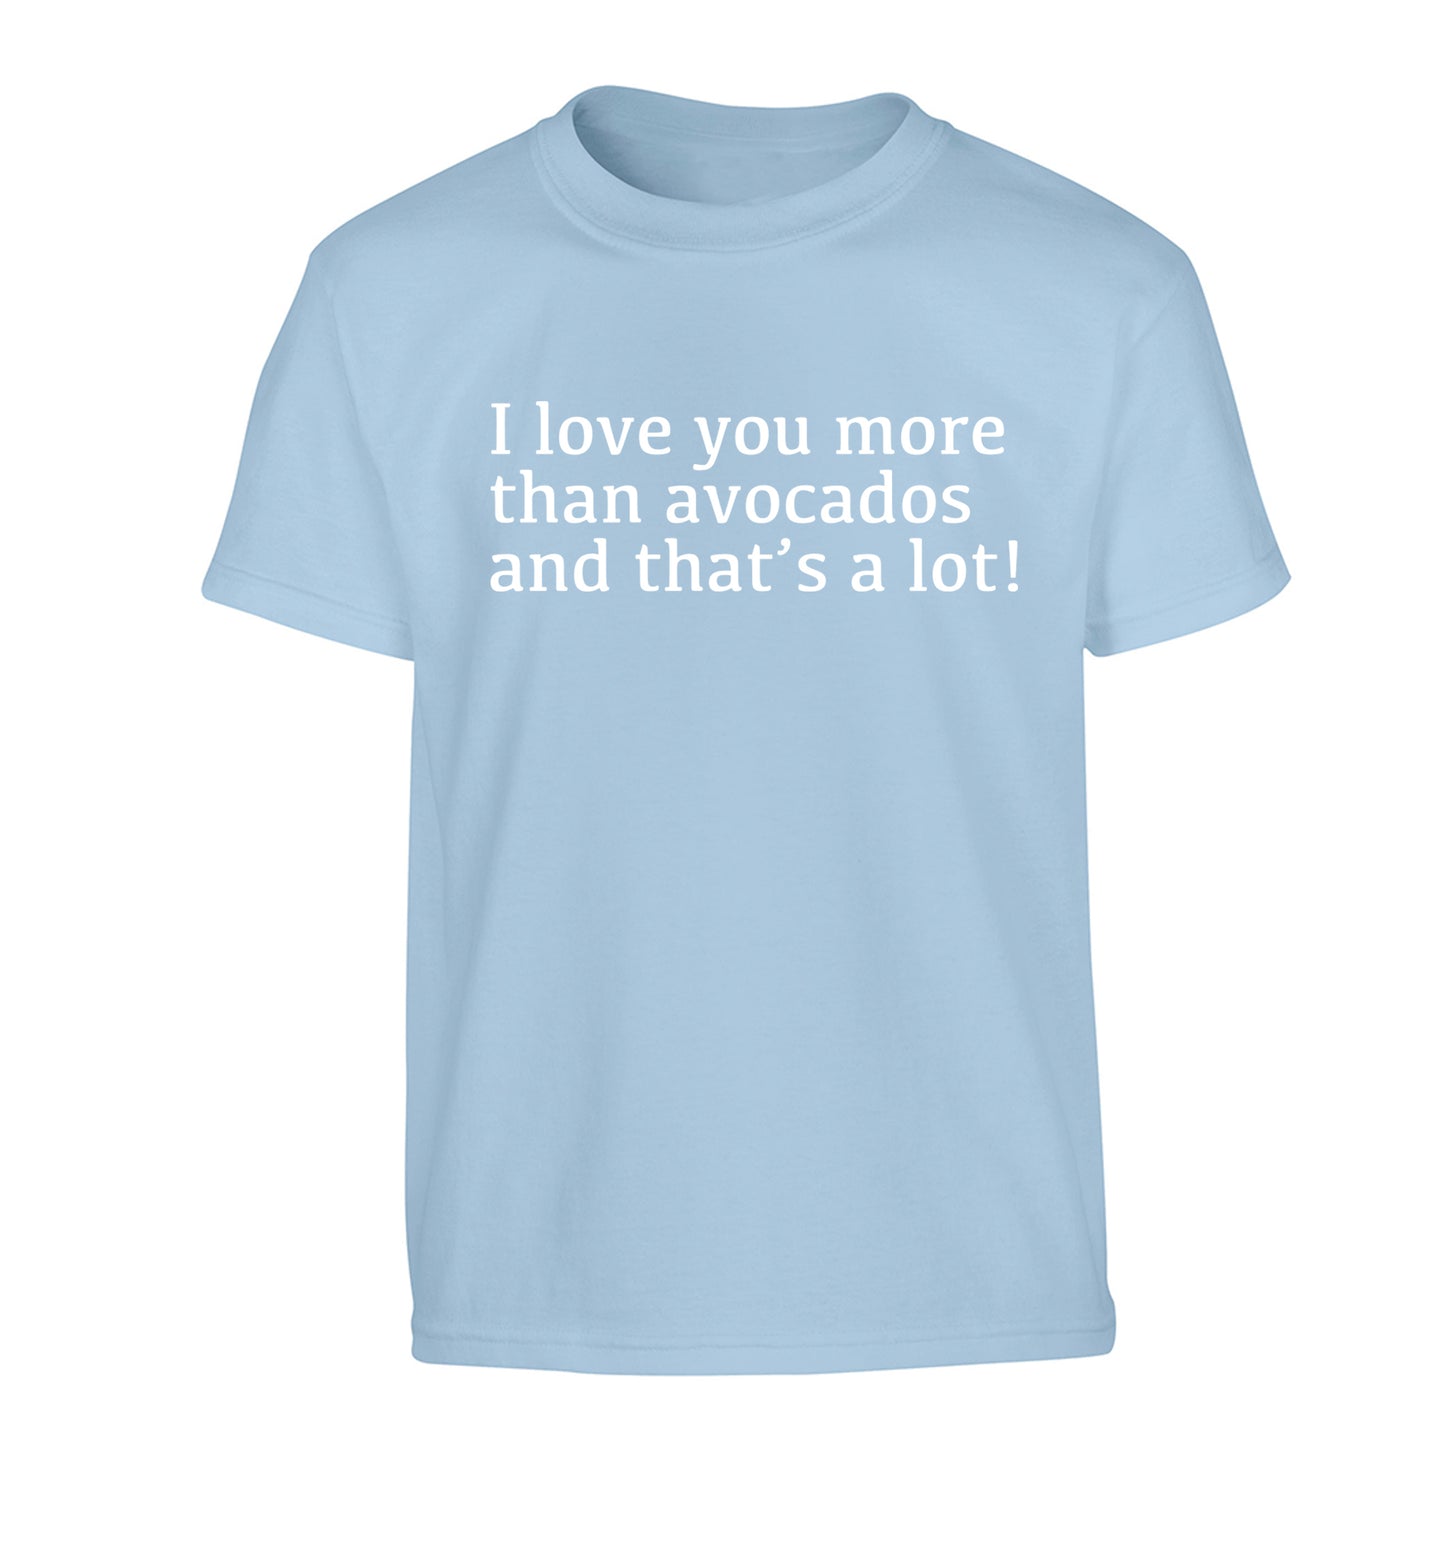 I love you more than avocados and that's a lot Children's light blue Tshirt 12-14 Years